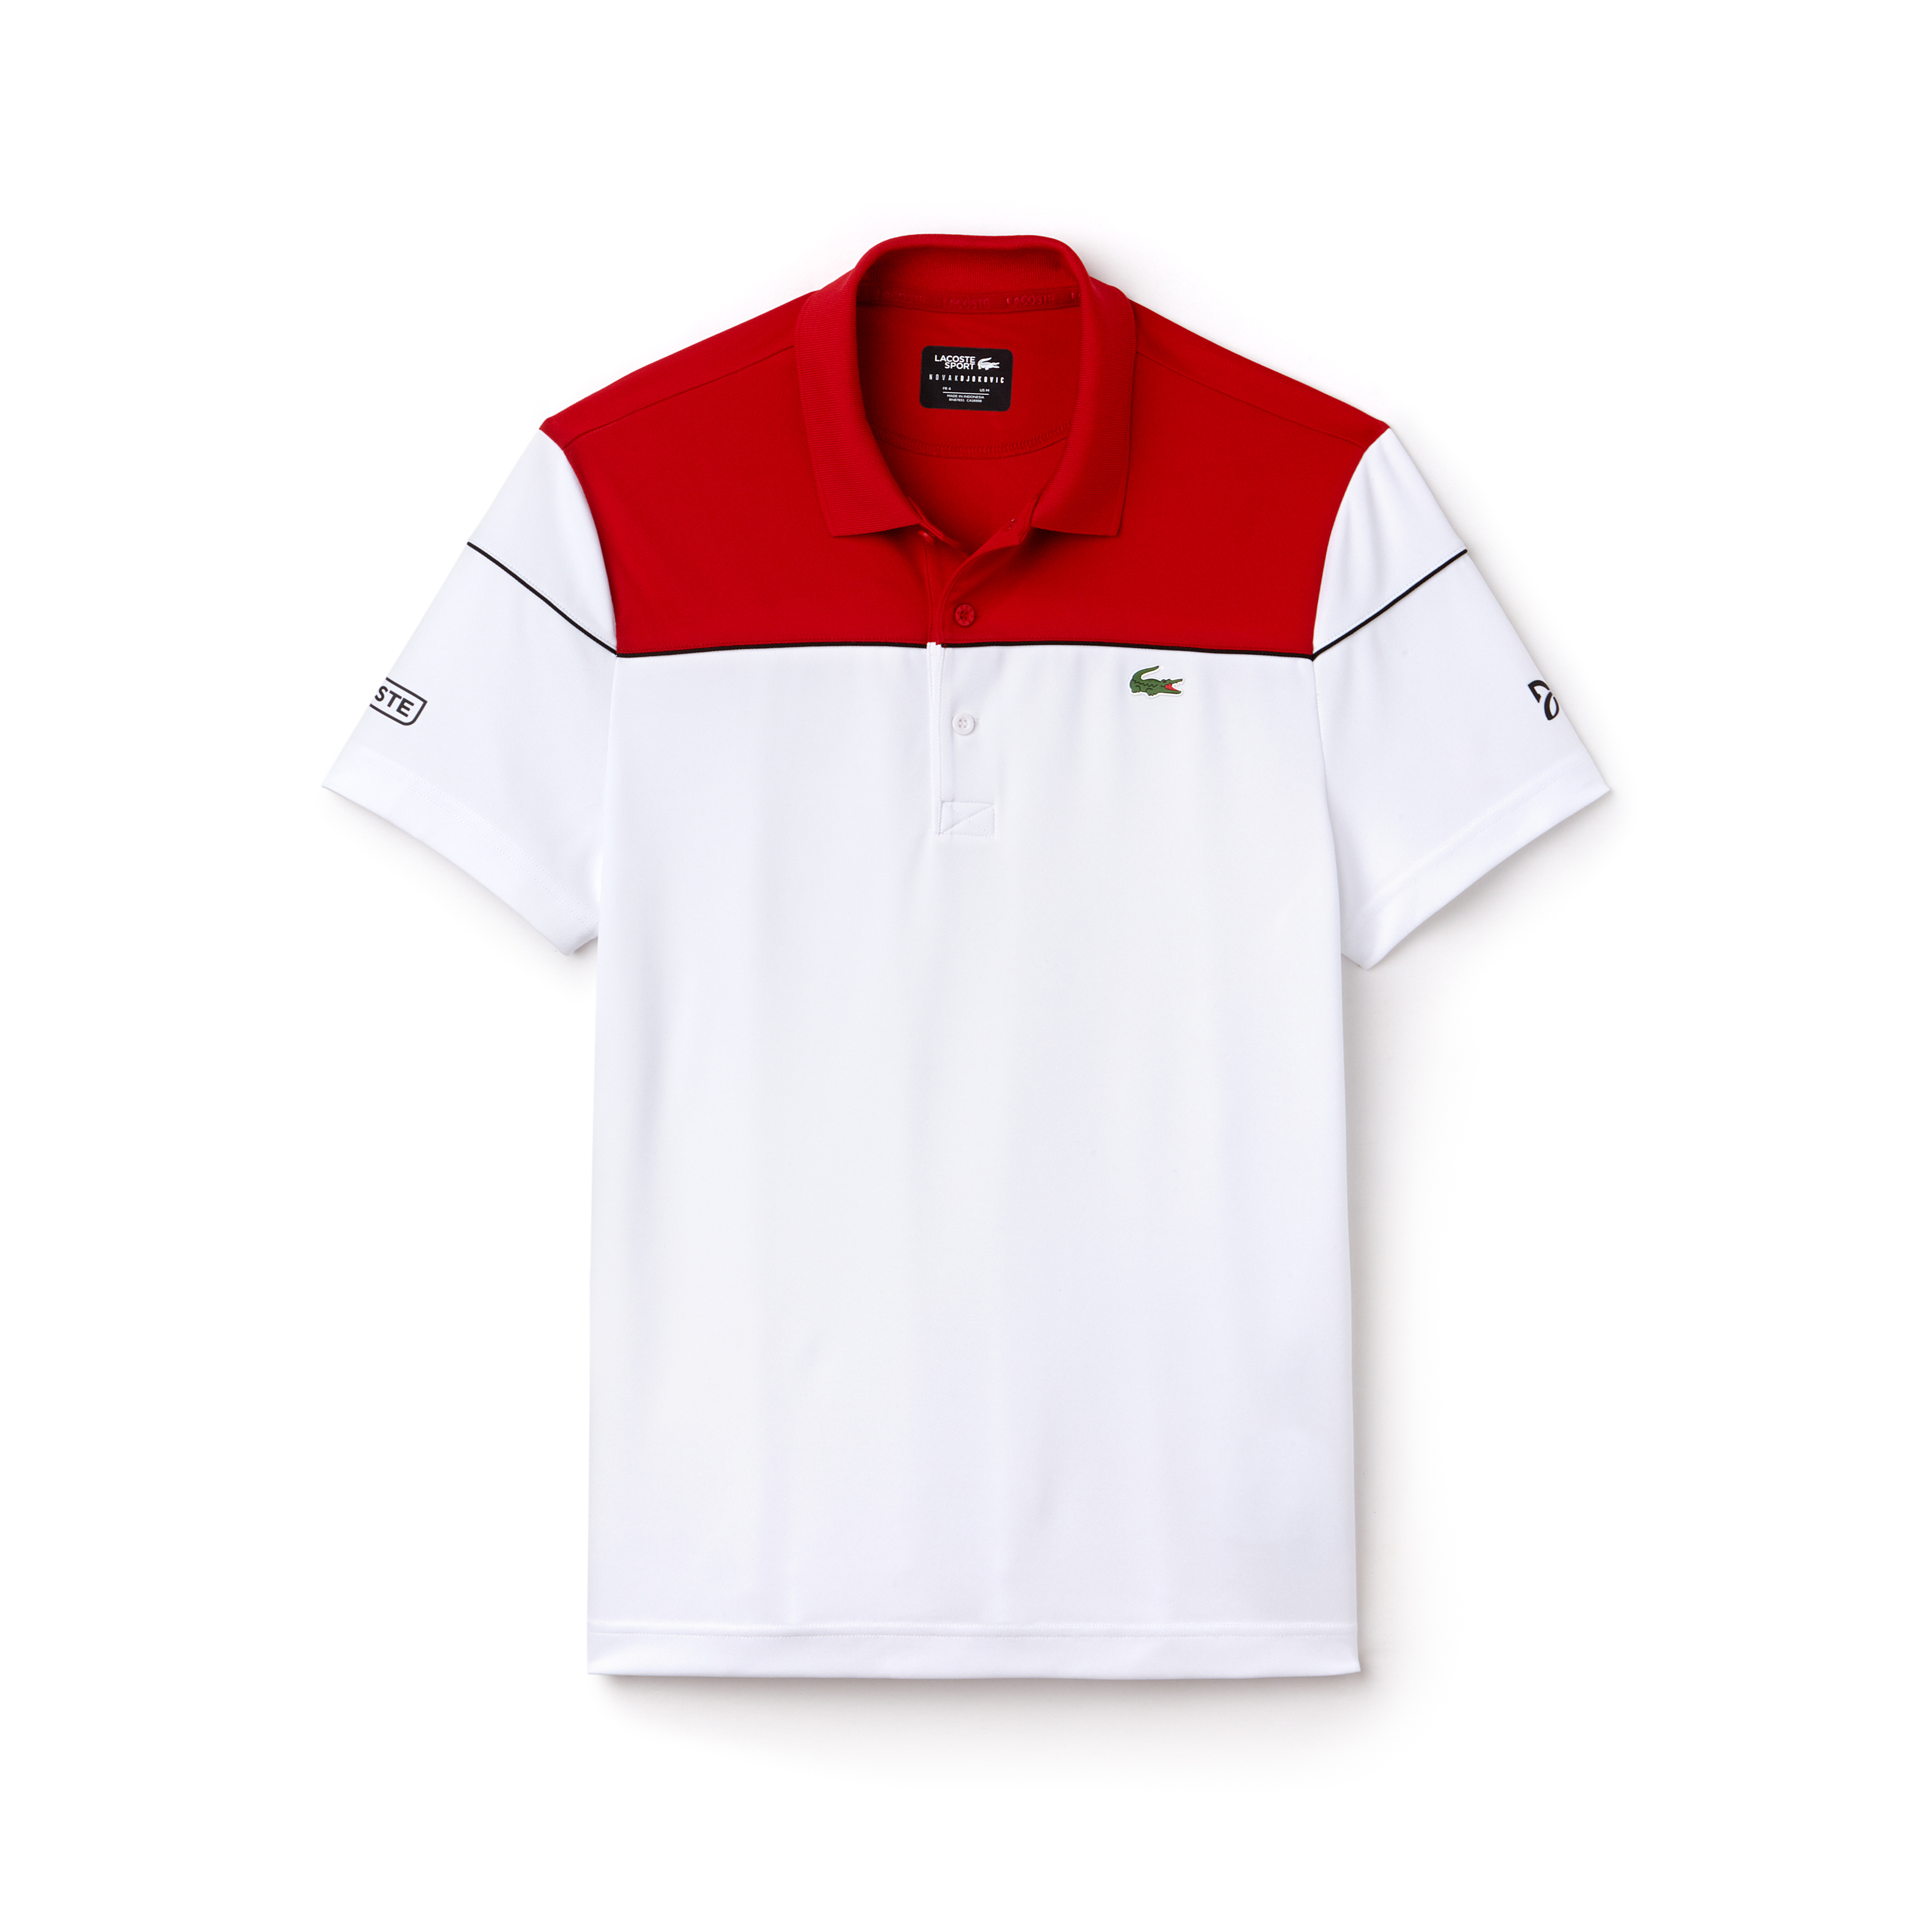 lacoste 2018 t shirts